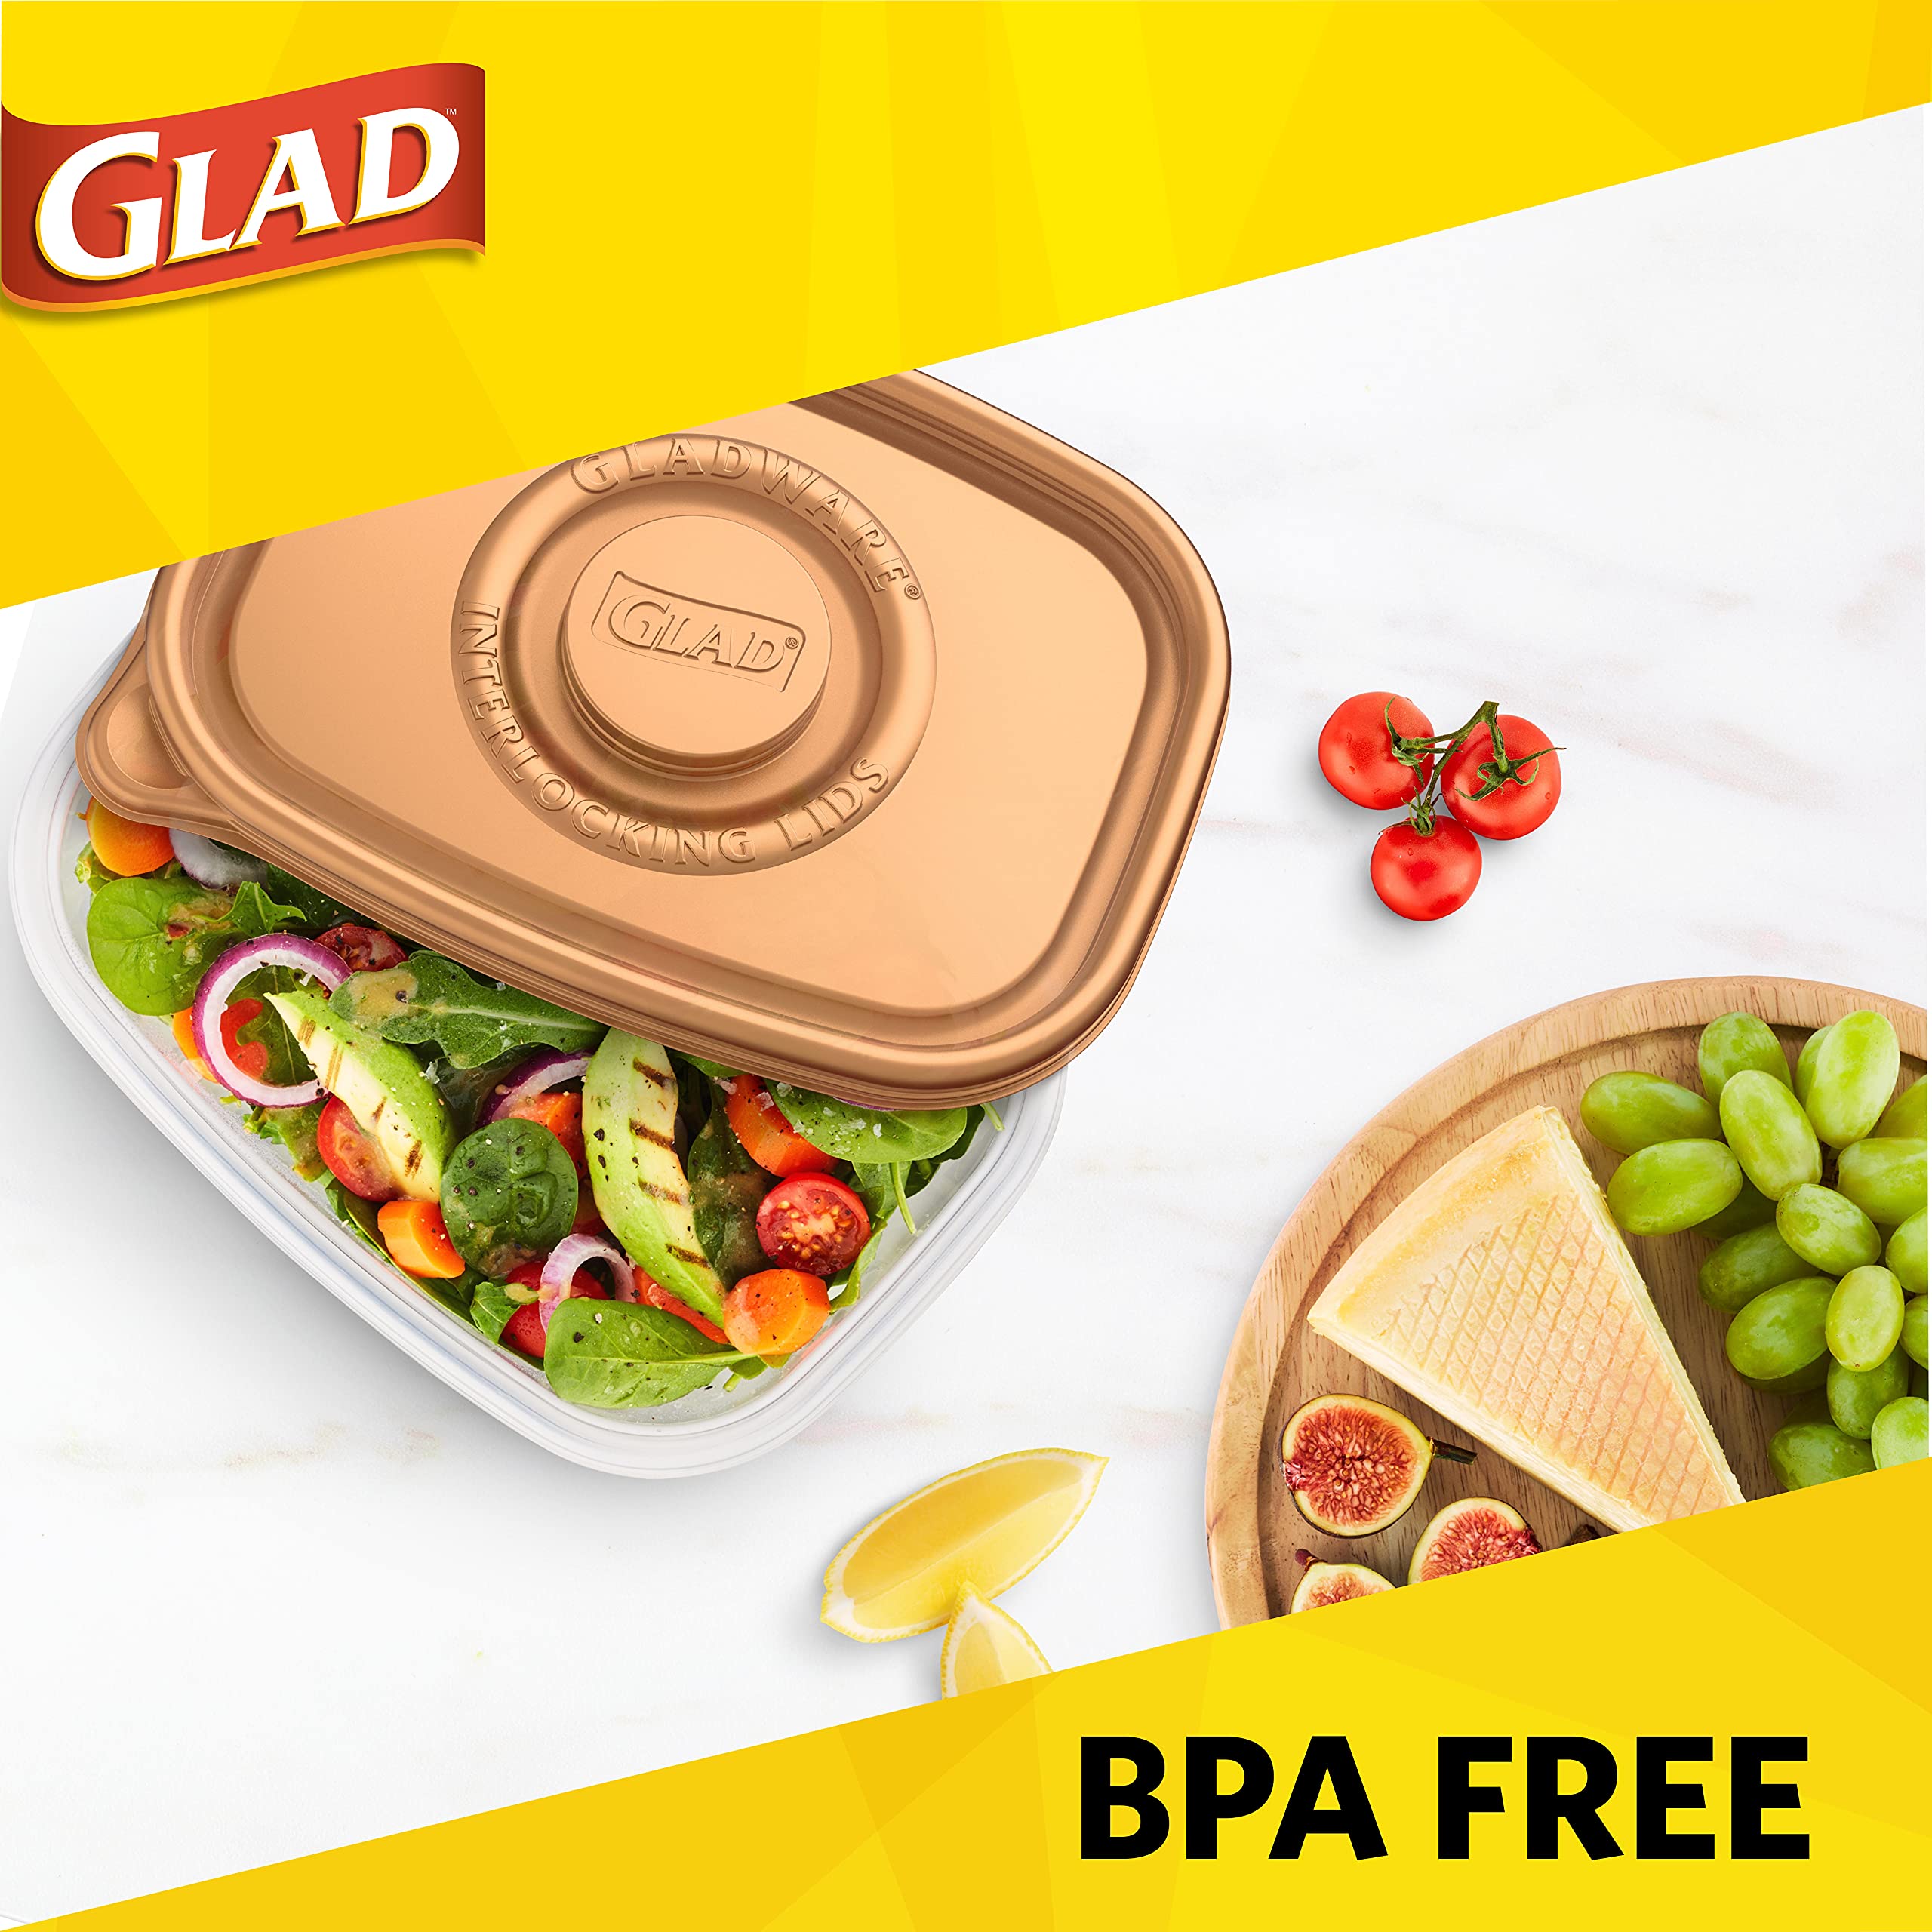 GladWare Home Deep Dish Food Storage Containers, Large Rectangle Holds 64 Ounces of Food, 3 Count Set | With Glad Lock Tight Seal, BPA Free Containers and Lids